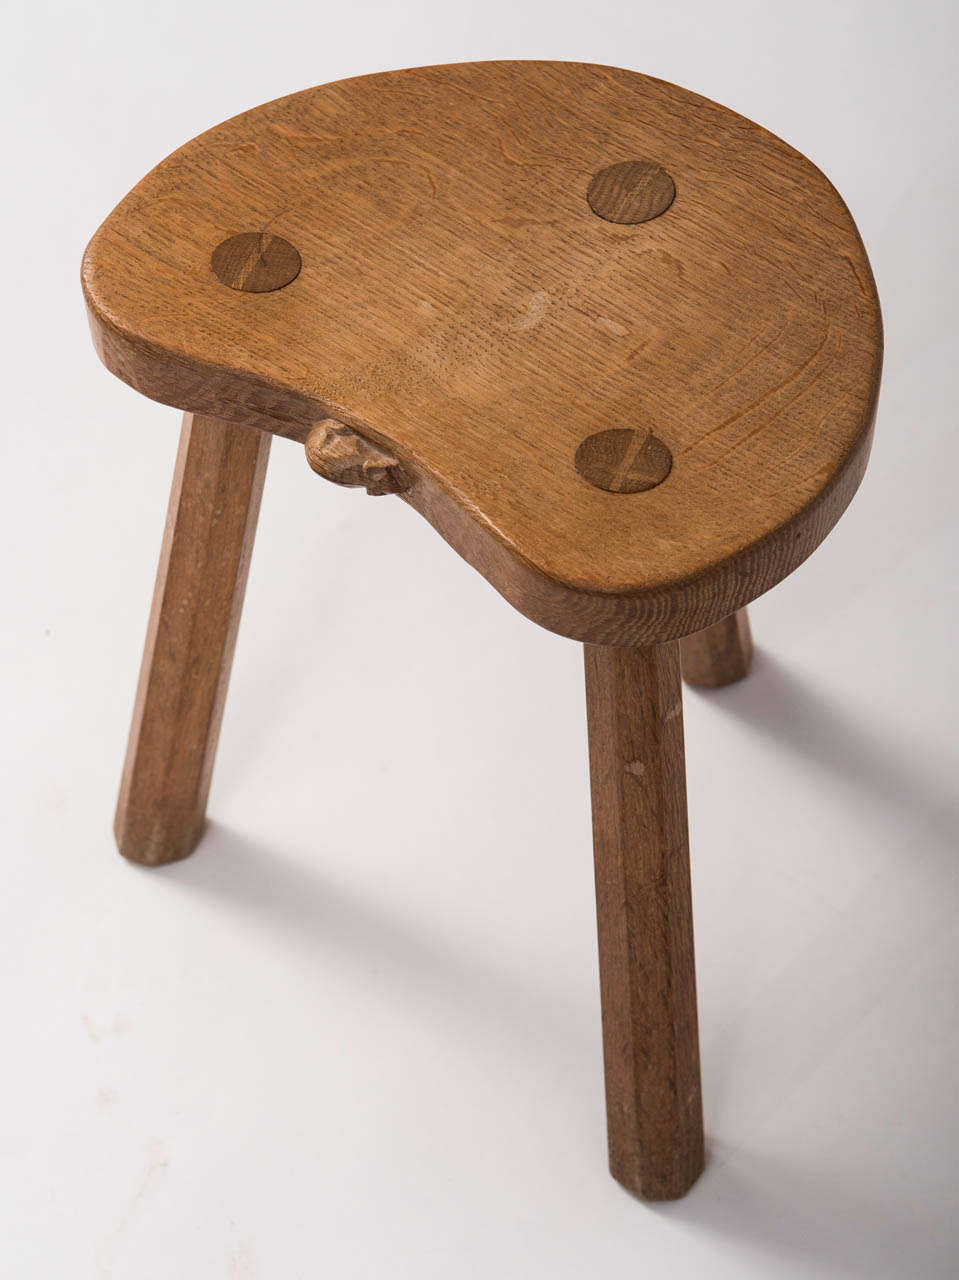 A Robert Thompson “Mouseman” Milking Stool.
Adzed kidney seat supported on octagonal legs.
Oak
Carved mouse 
English
Circa 1970
36cms x 30cms x 25cms